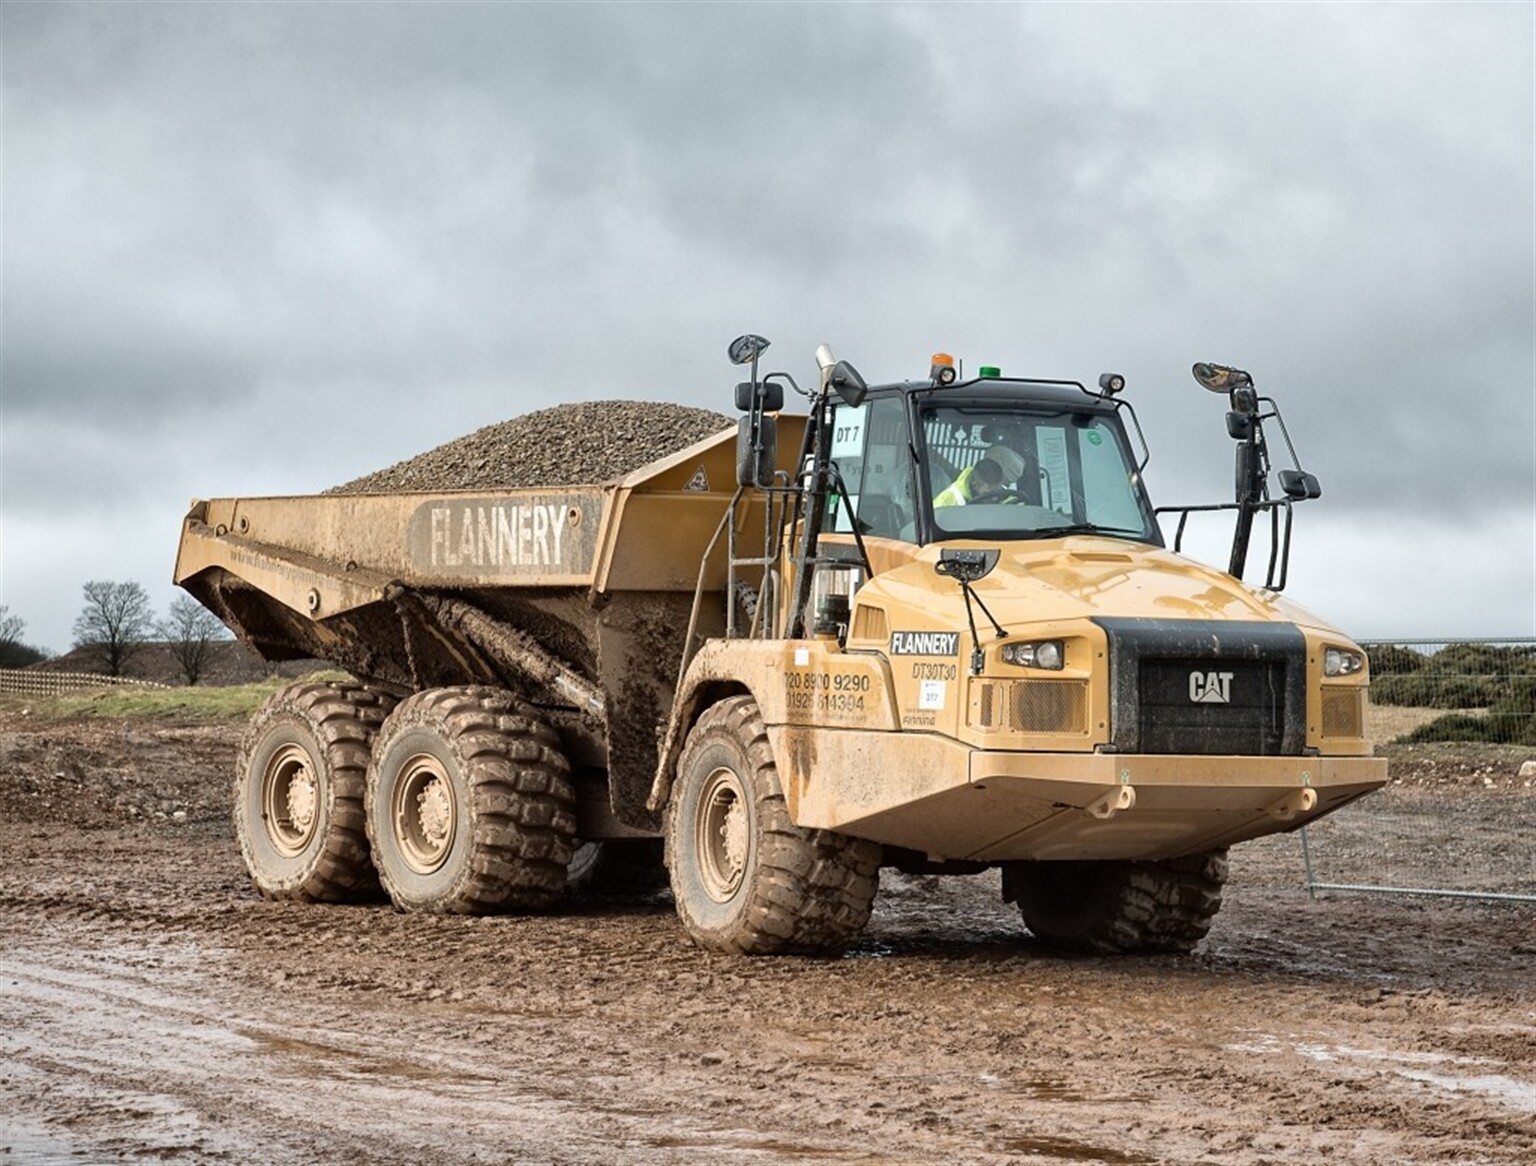 35m investment in new high-tech Cat kit by Flannery